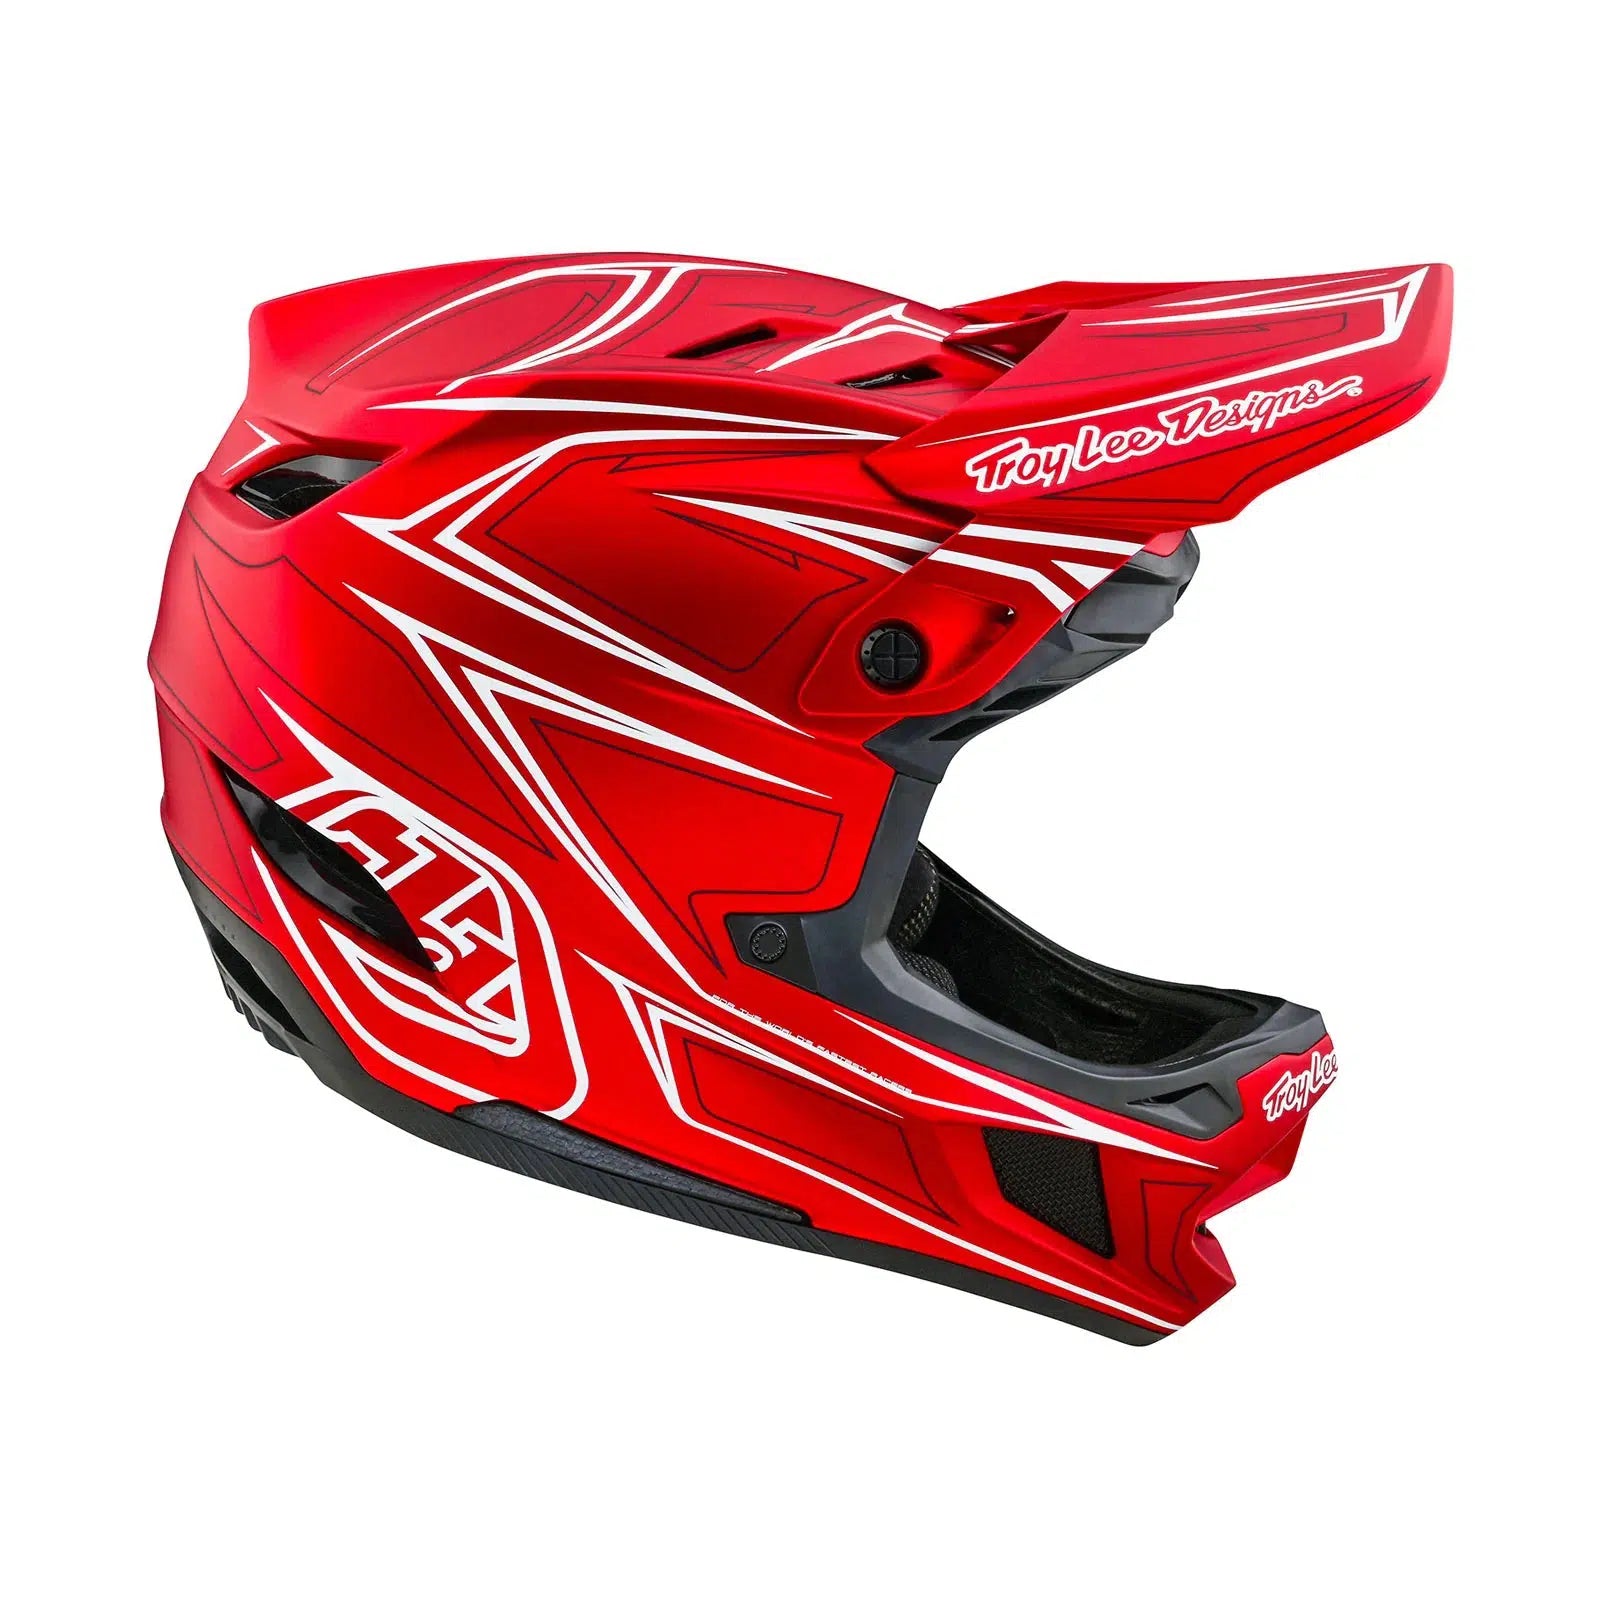 A TLD D4 AS Composite Helmet W/MIPS Pinned Red with Mips C2 protection system on a white background.